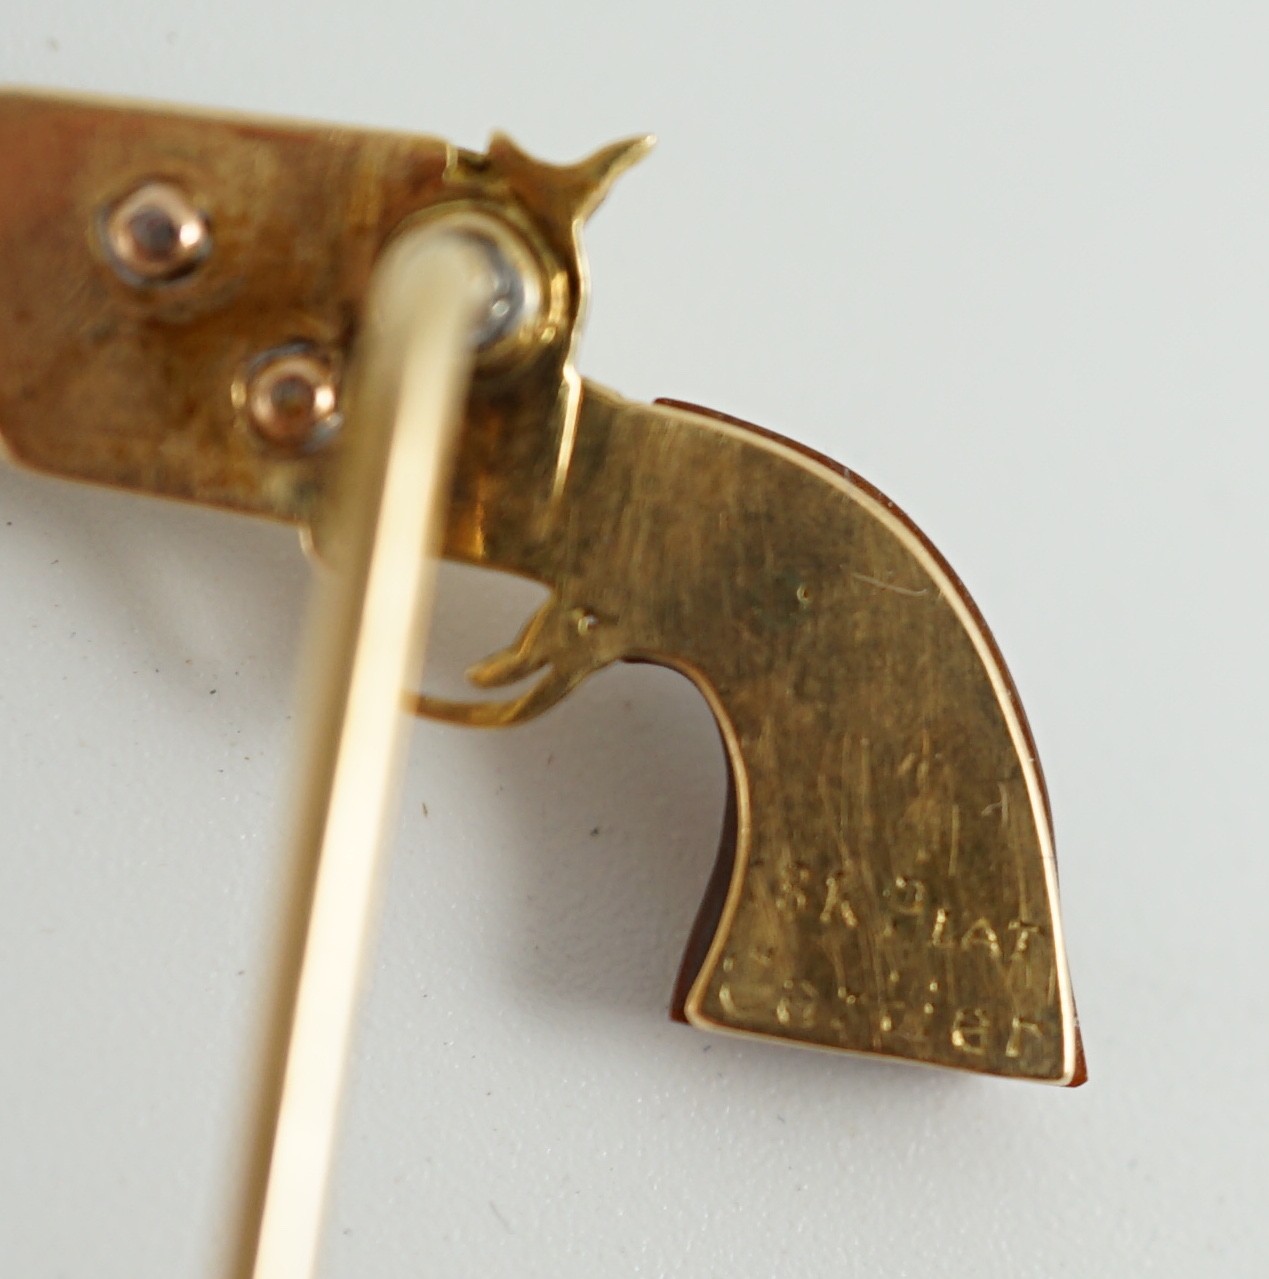 A Cartier 18k gold, platinum and six stone baguette cut diamond set novelty stick pin, modelled and a pistol inscribed 'Peacemaker'